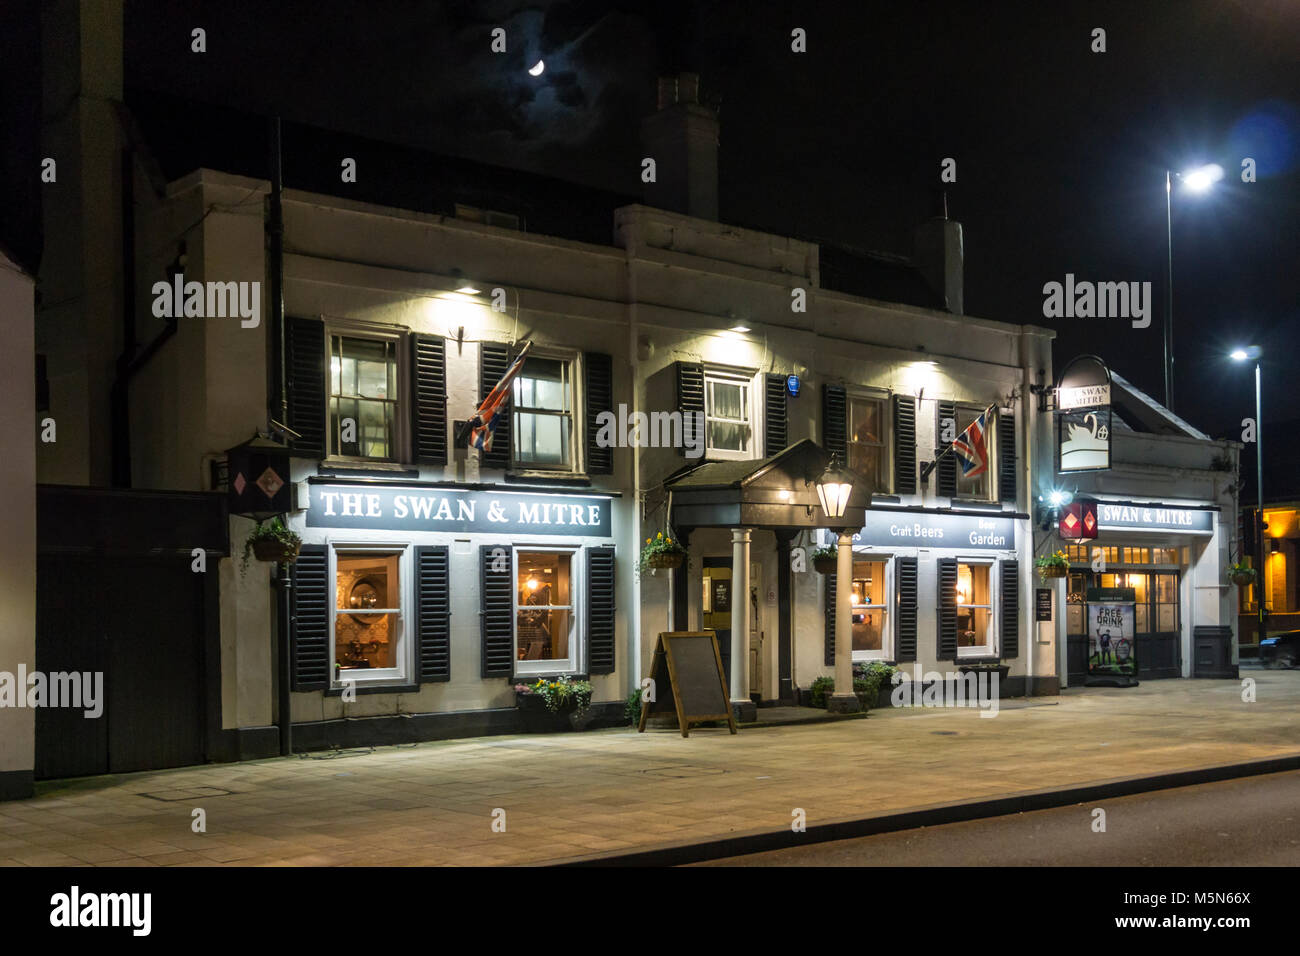 The Swan & Mitre pub in Bromley at night. Stock Photo